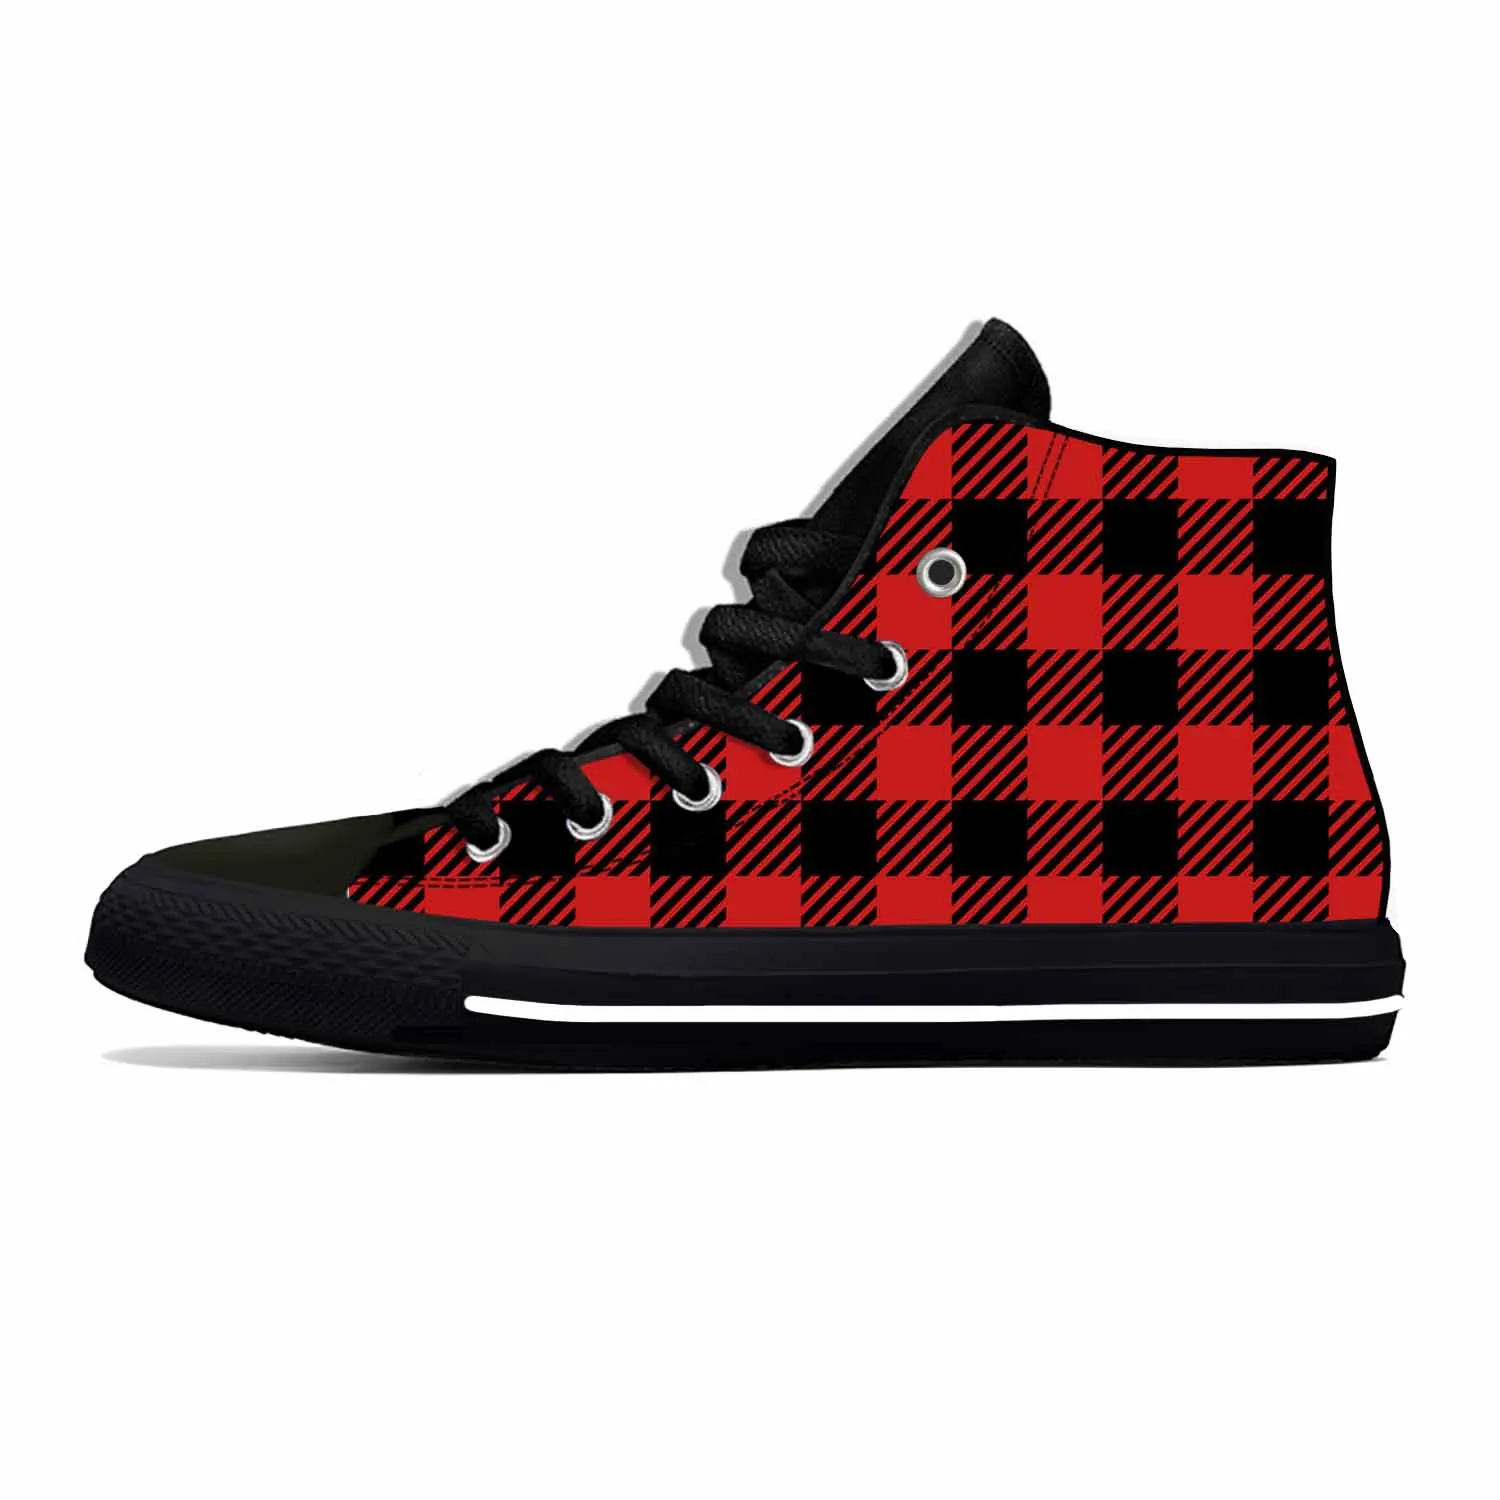 

Hot Buffalo Plaid Check Scottish Tartan Aesthetic Breathable Casual Shoes High Top Board Shoes Lightweight Men Women Sneakers